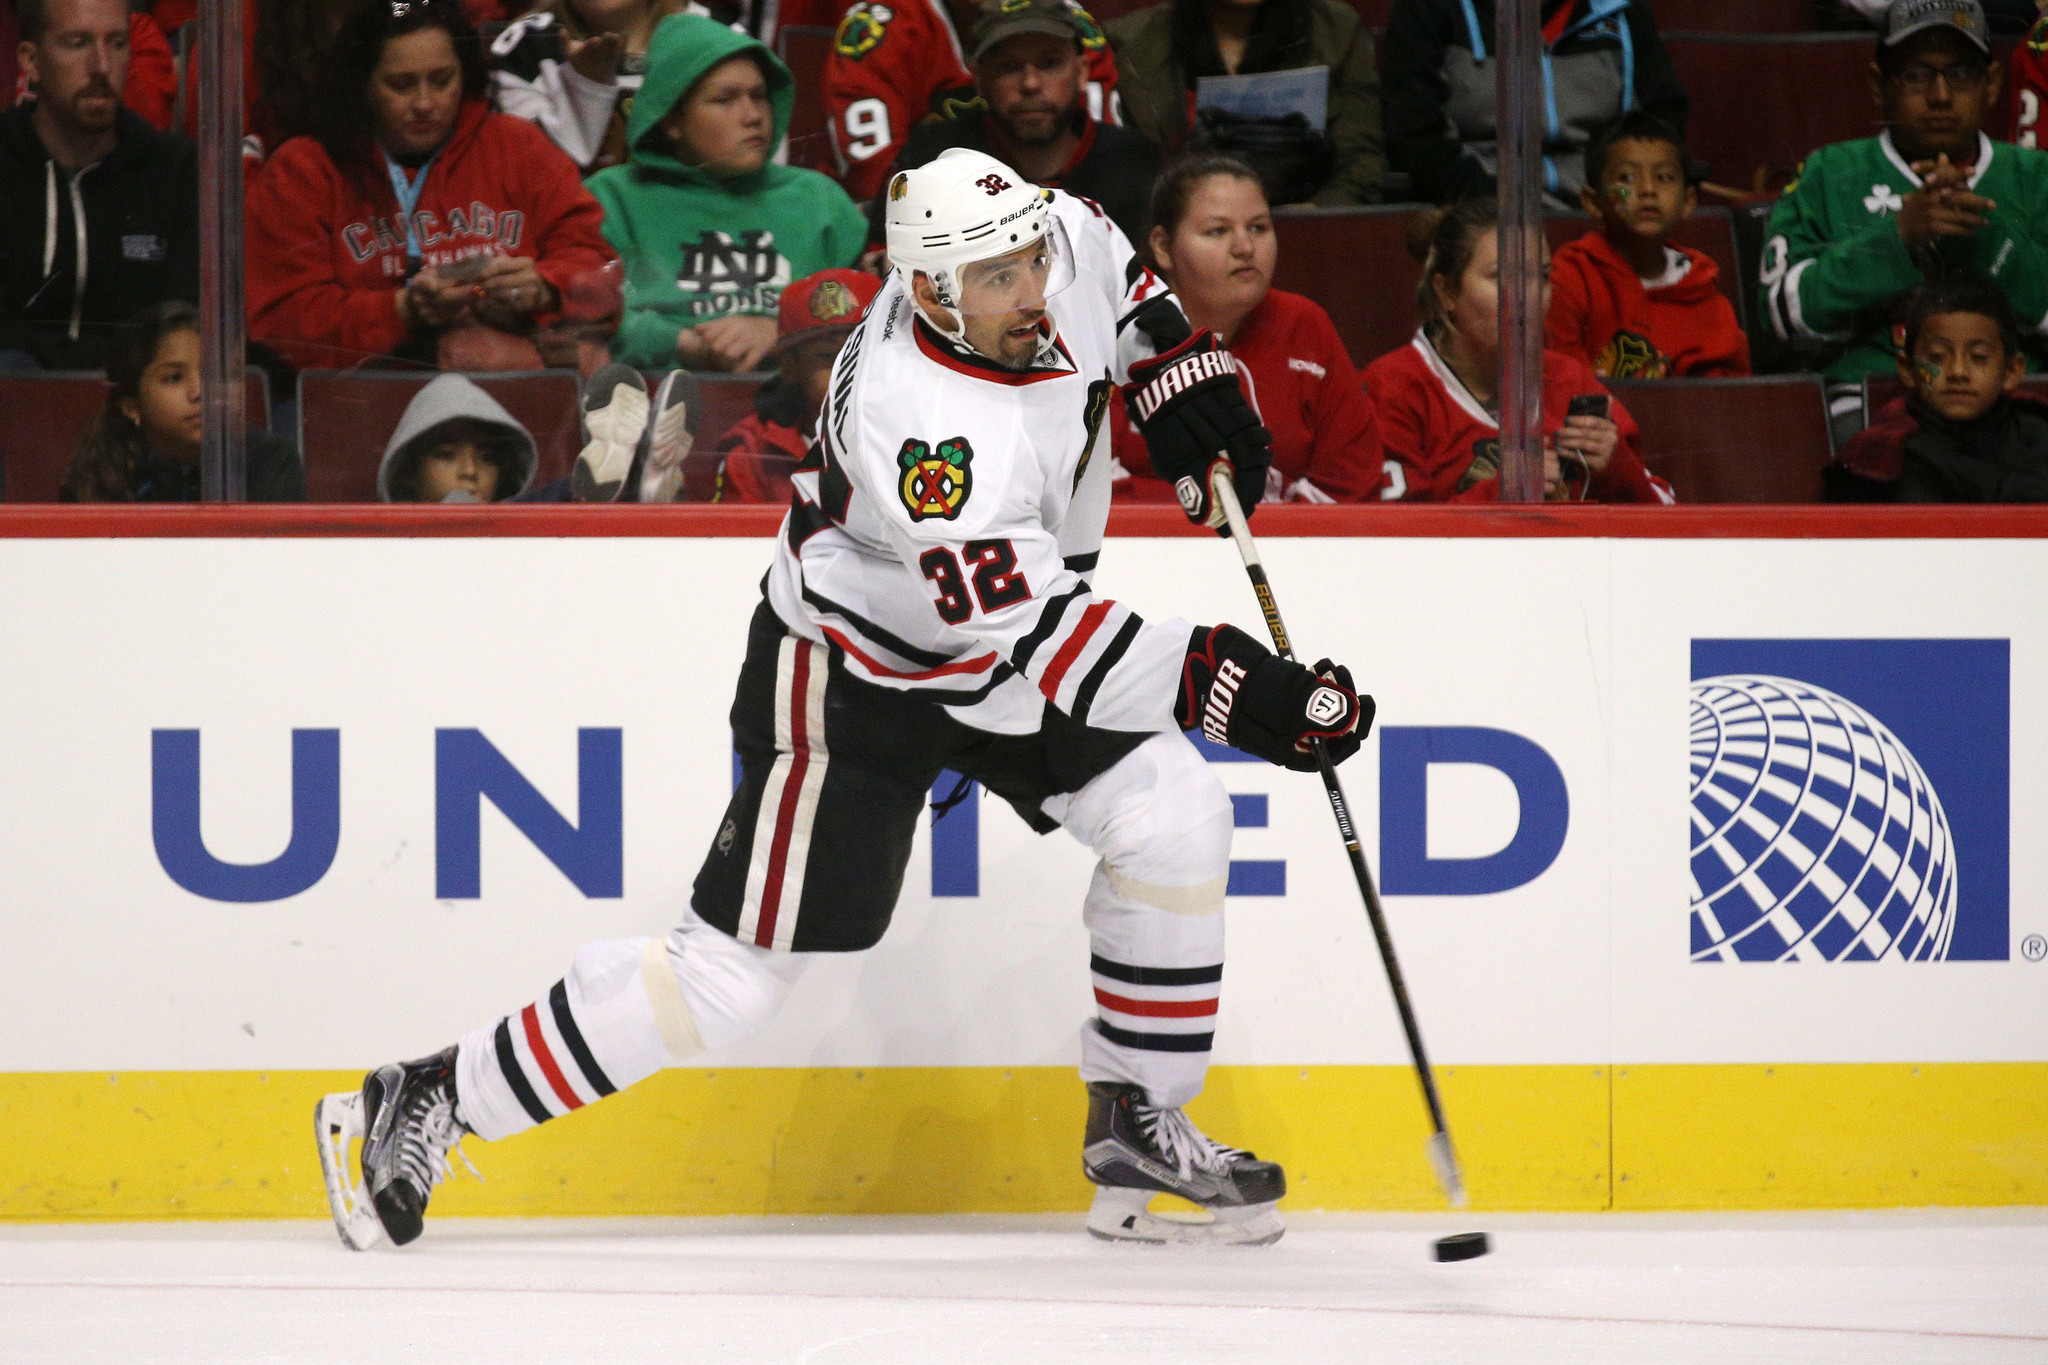 Michal Rozsival in lineup for Blackhawks vs. Flames